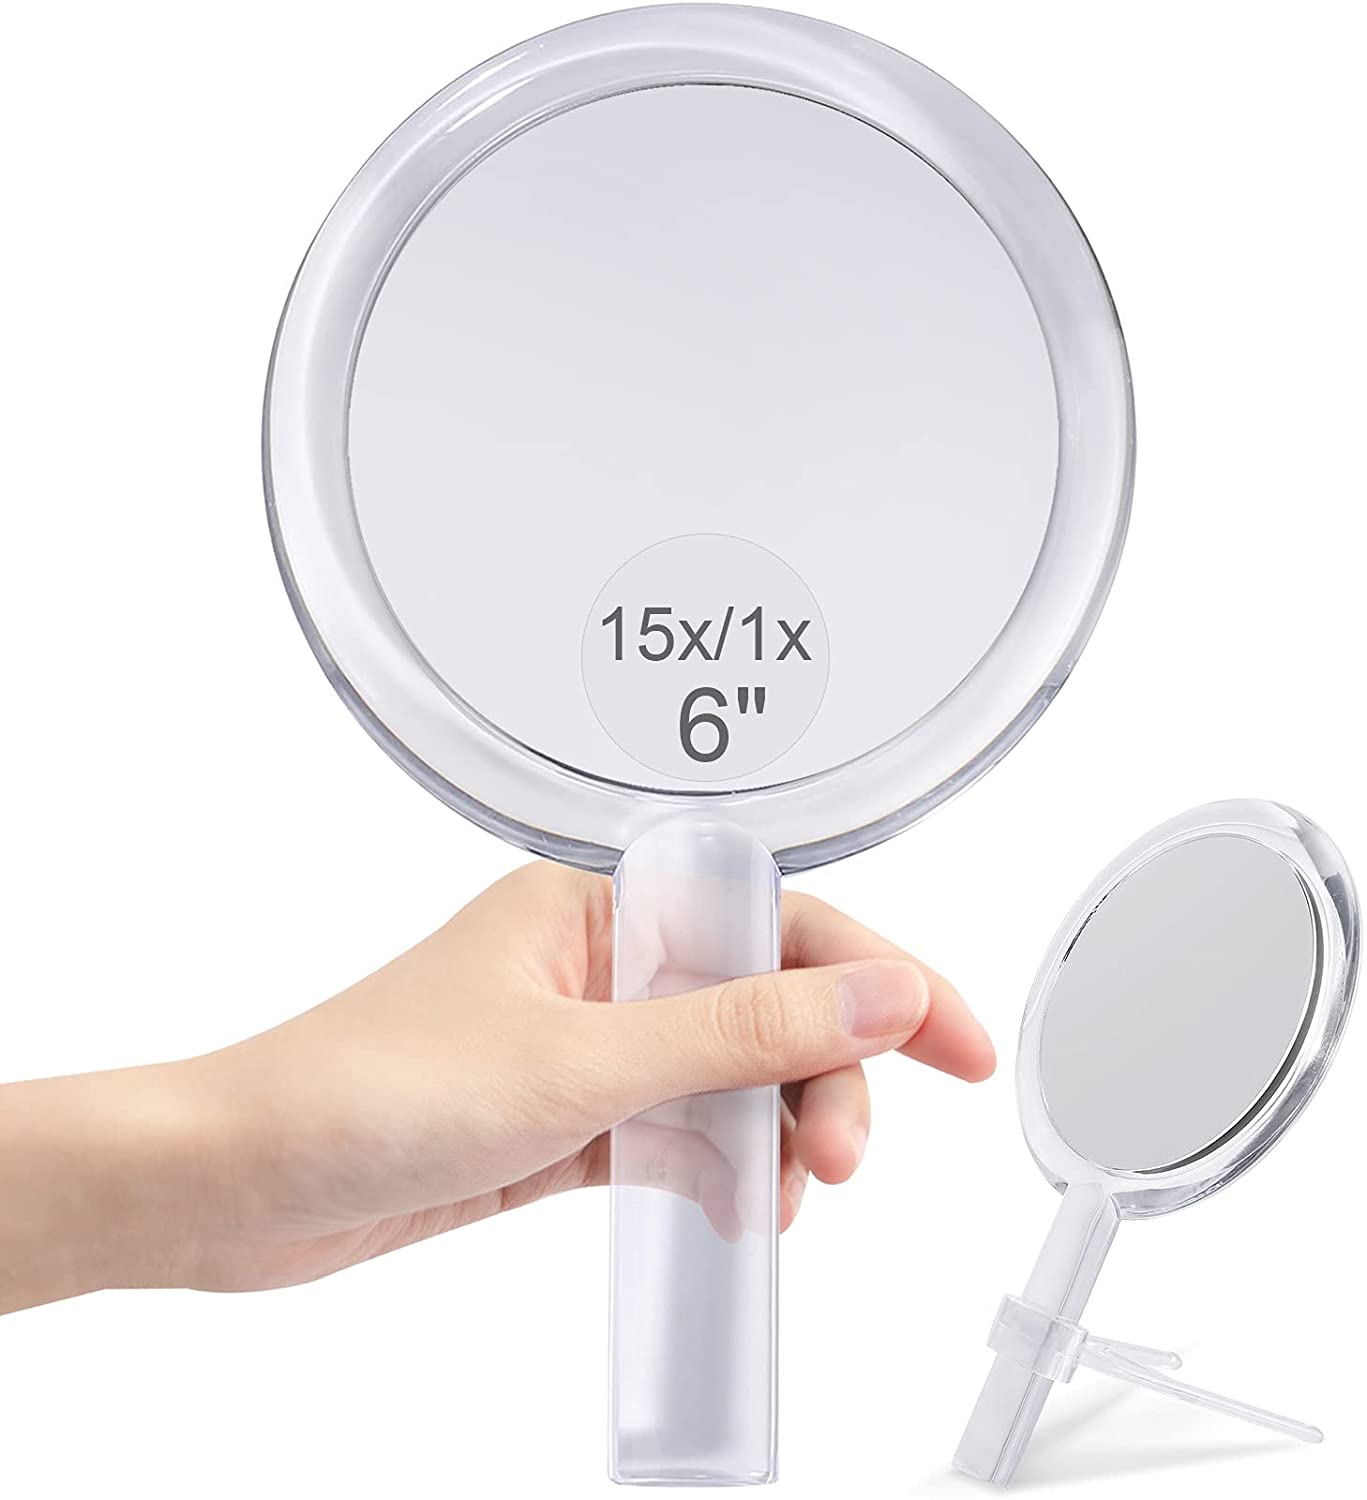 20X Magnifying Hand Mirror Two Sided Use for Makeup Application, Tweezing, and Blackhead/Blemish Removal (15 cm Silver) - SILBERSHELL